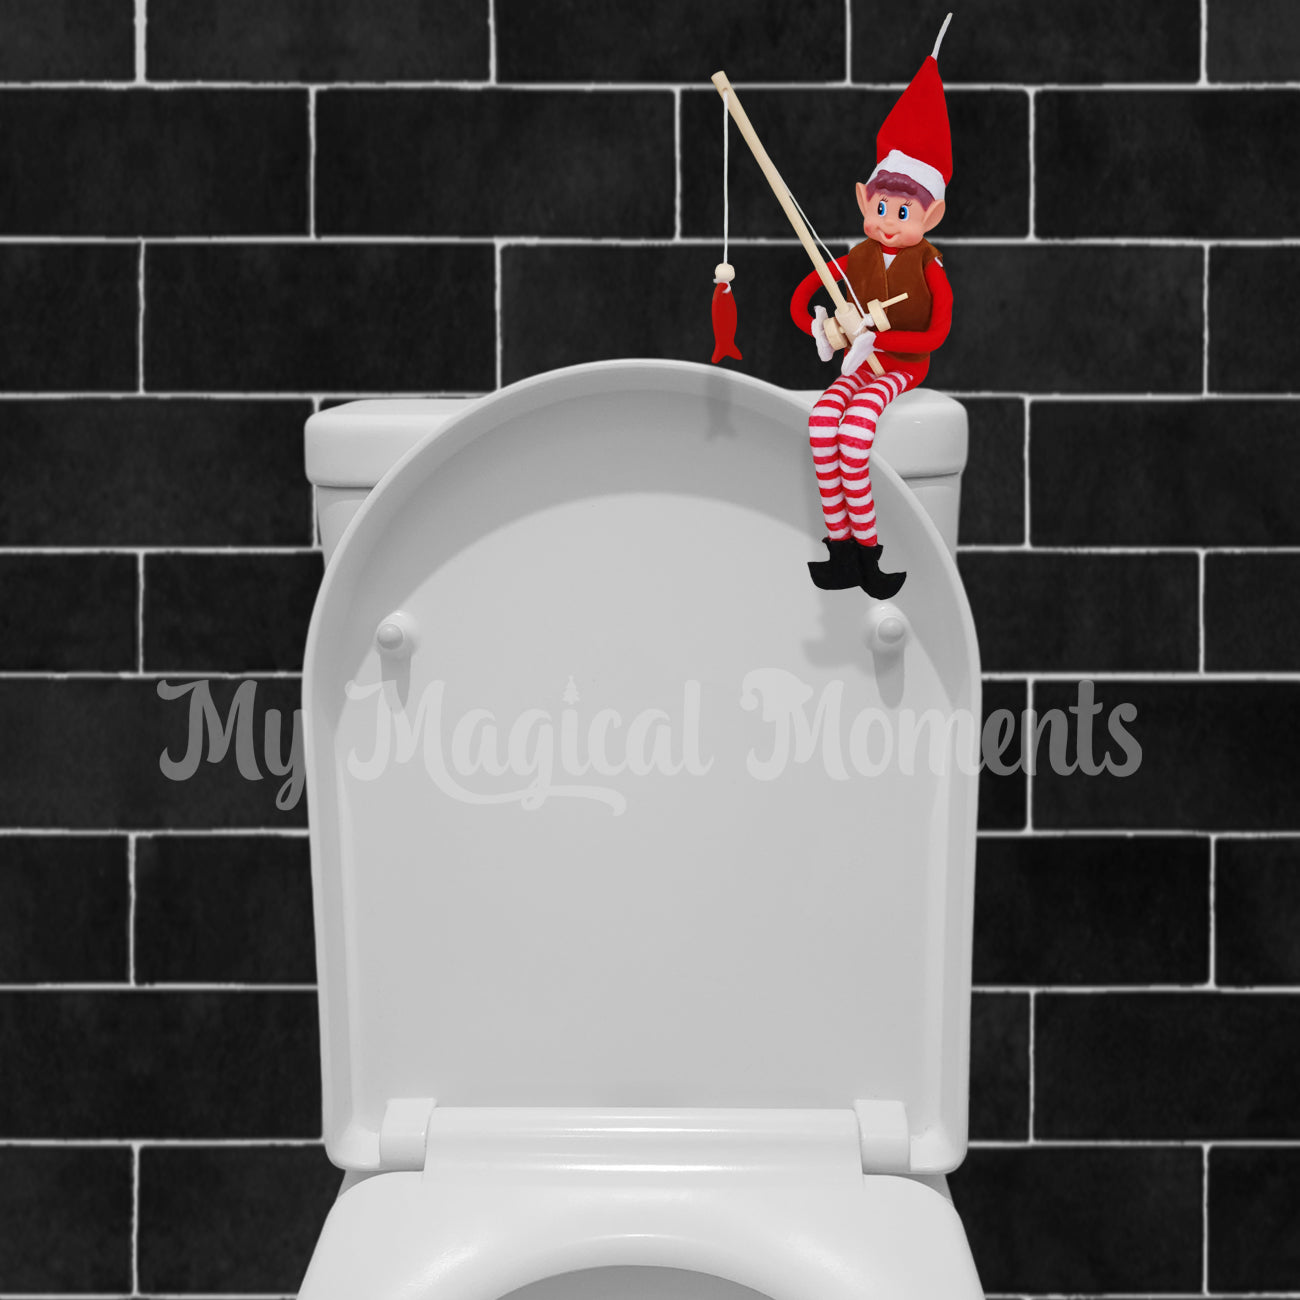 Fishing in the toilet antic with Elves behavin badly by My Magical Moments